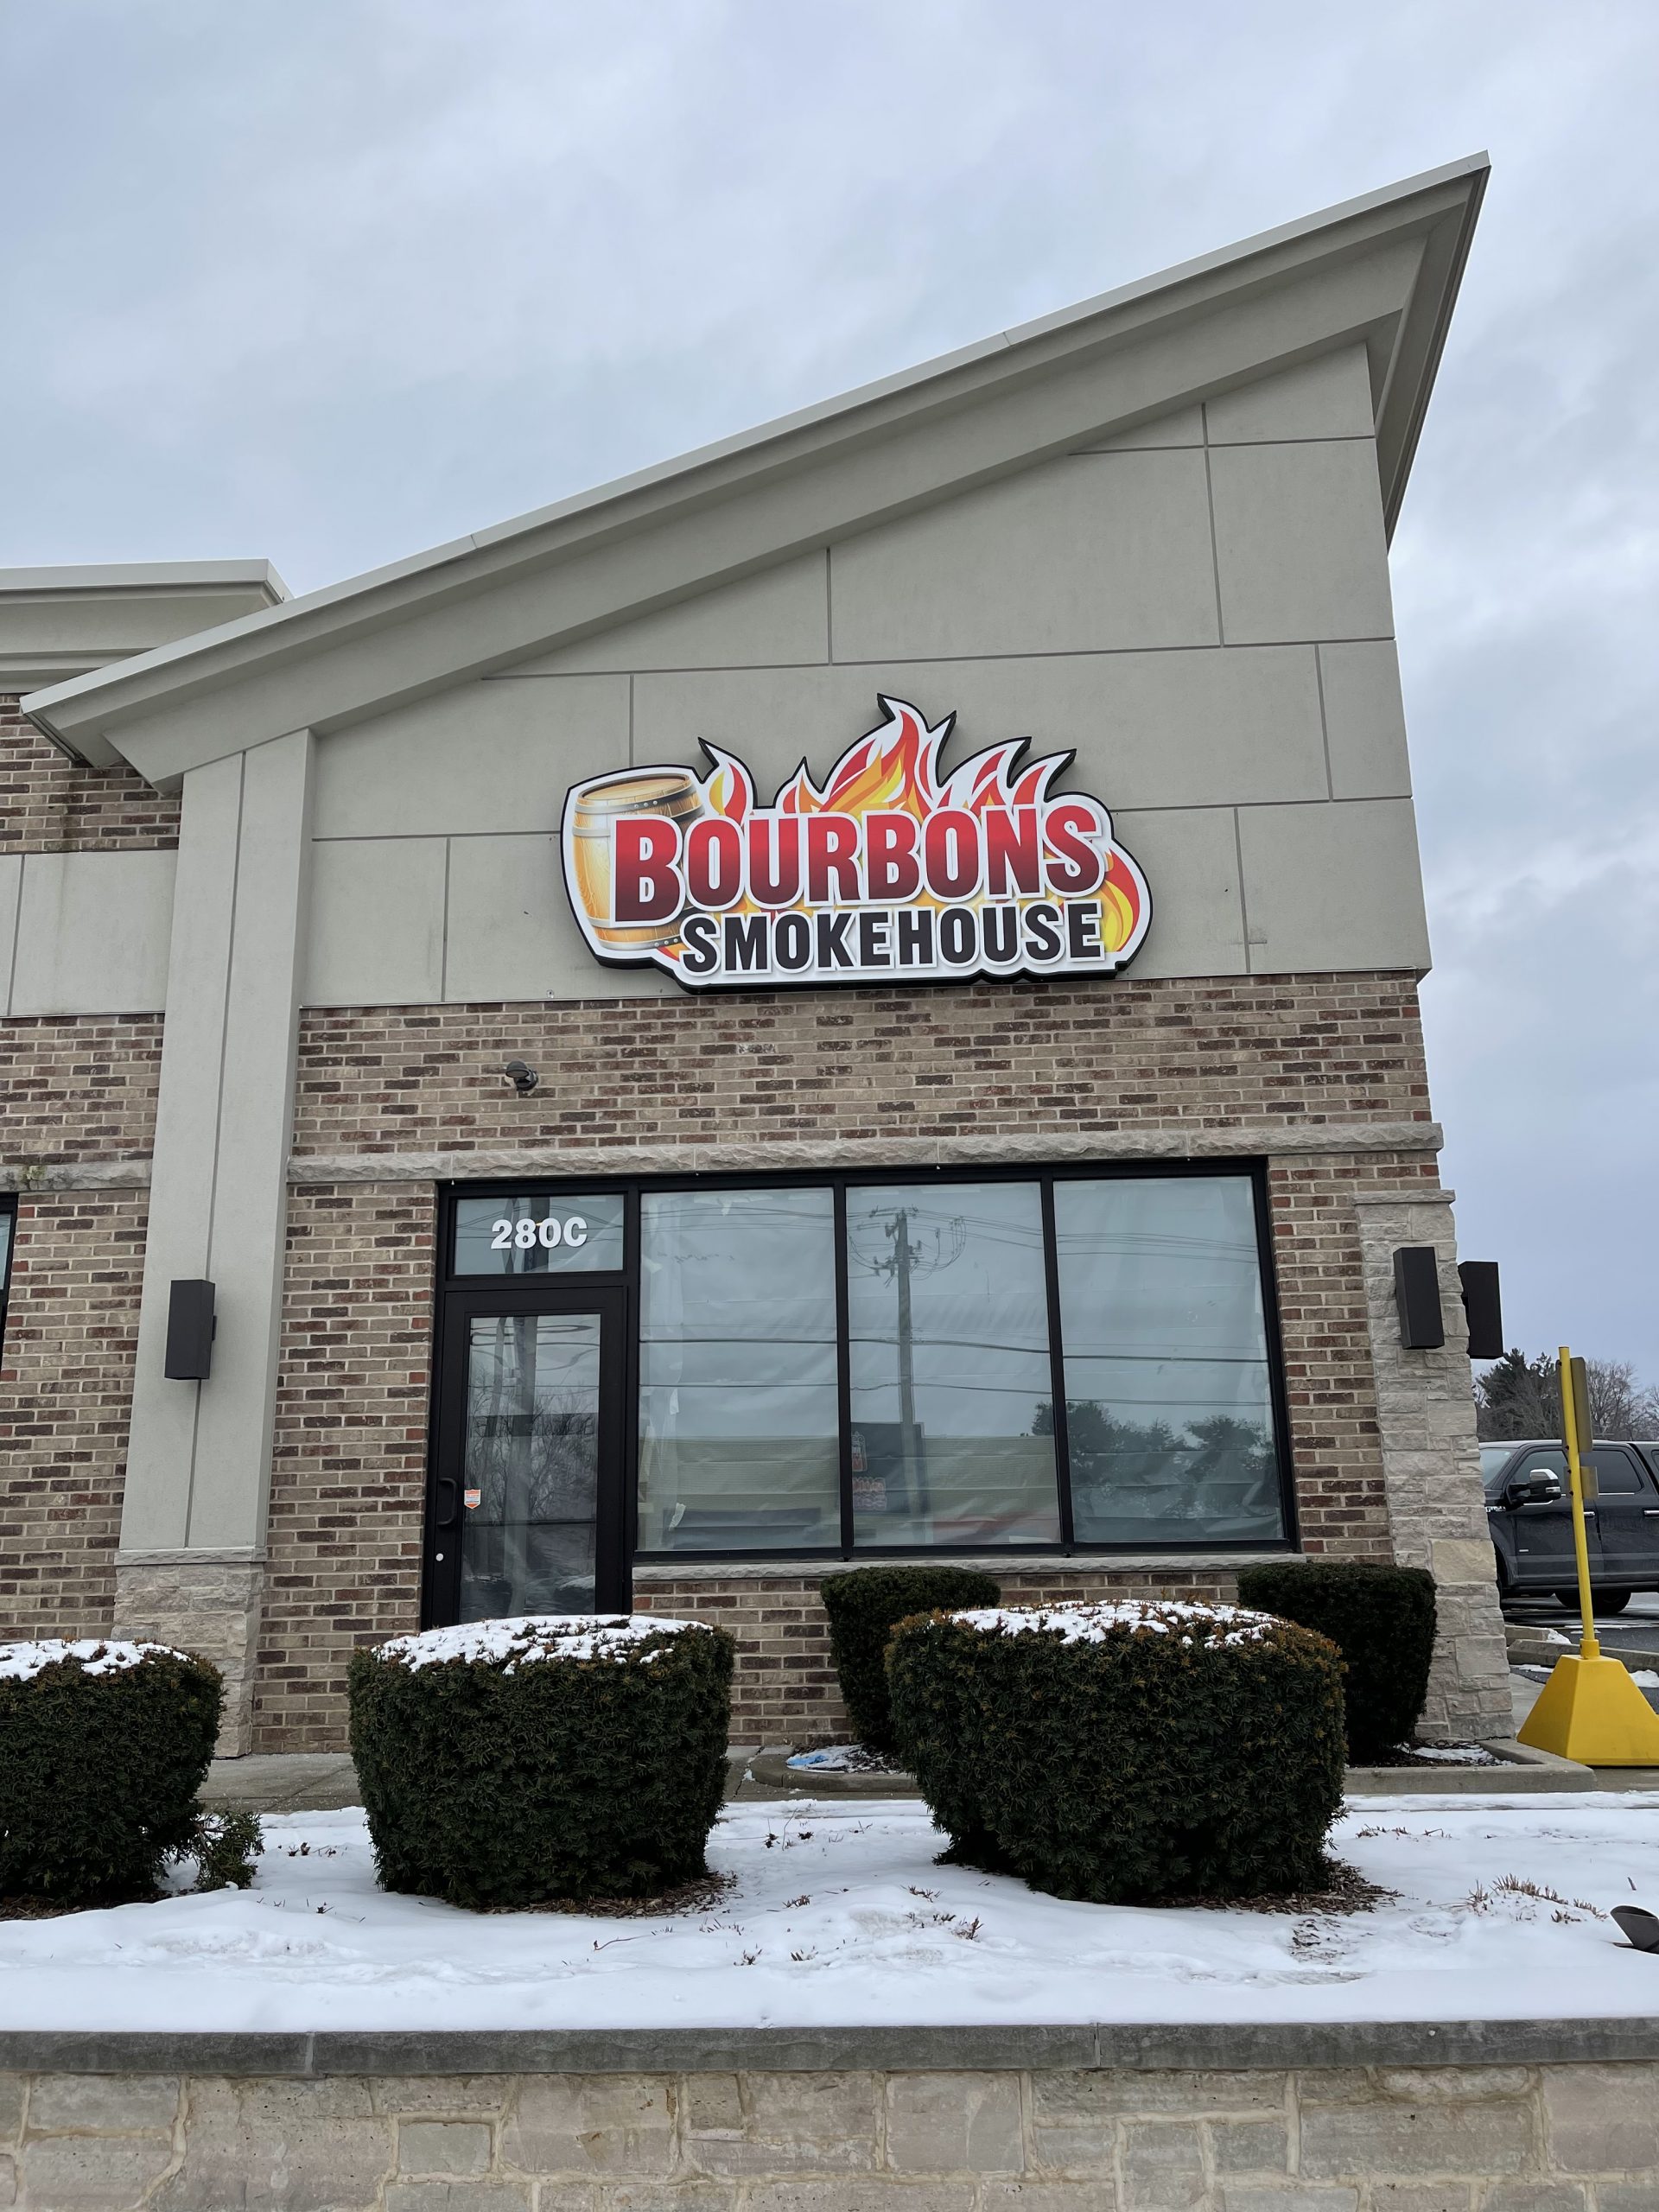 Bourbons Smokehouse Joliet Hanging Business Signs.